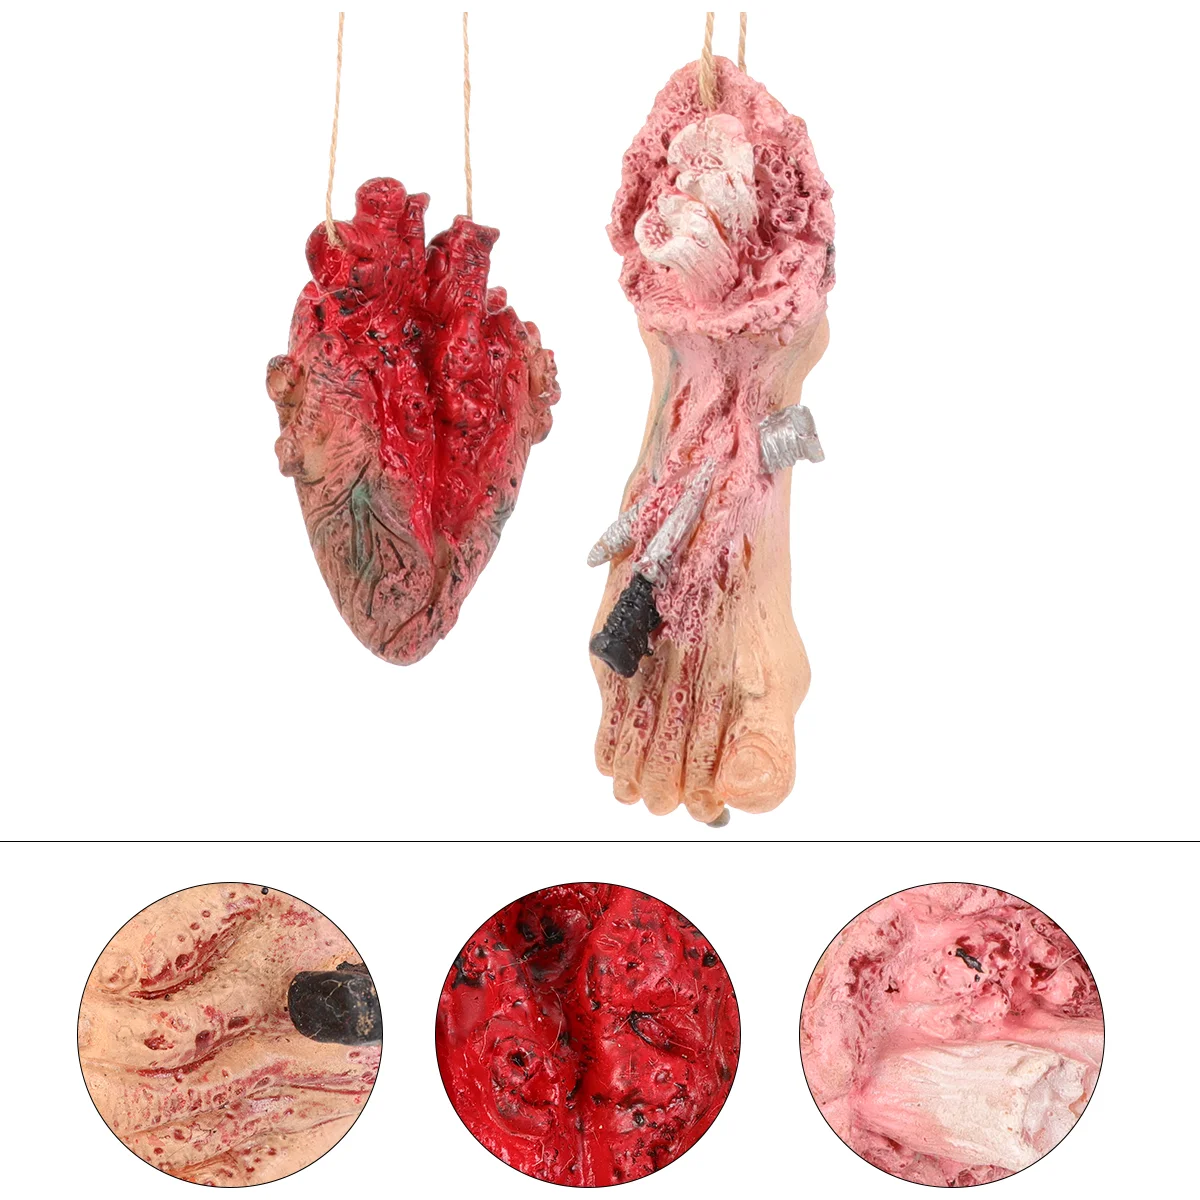 

2 Pcs Simulated Human Organ Pendant Halloween Scary Decorations Pendants Out Door Hanging Body Parts Props Haunted House